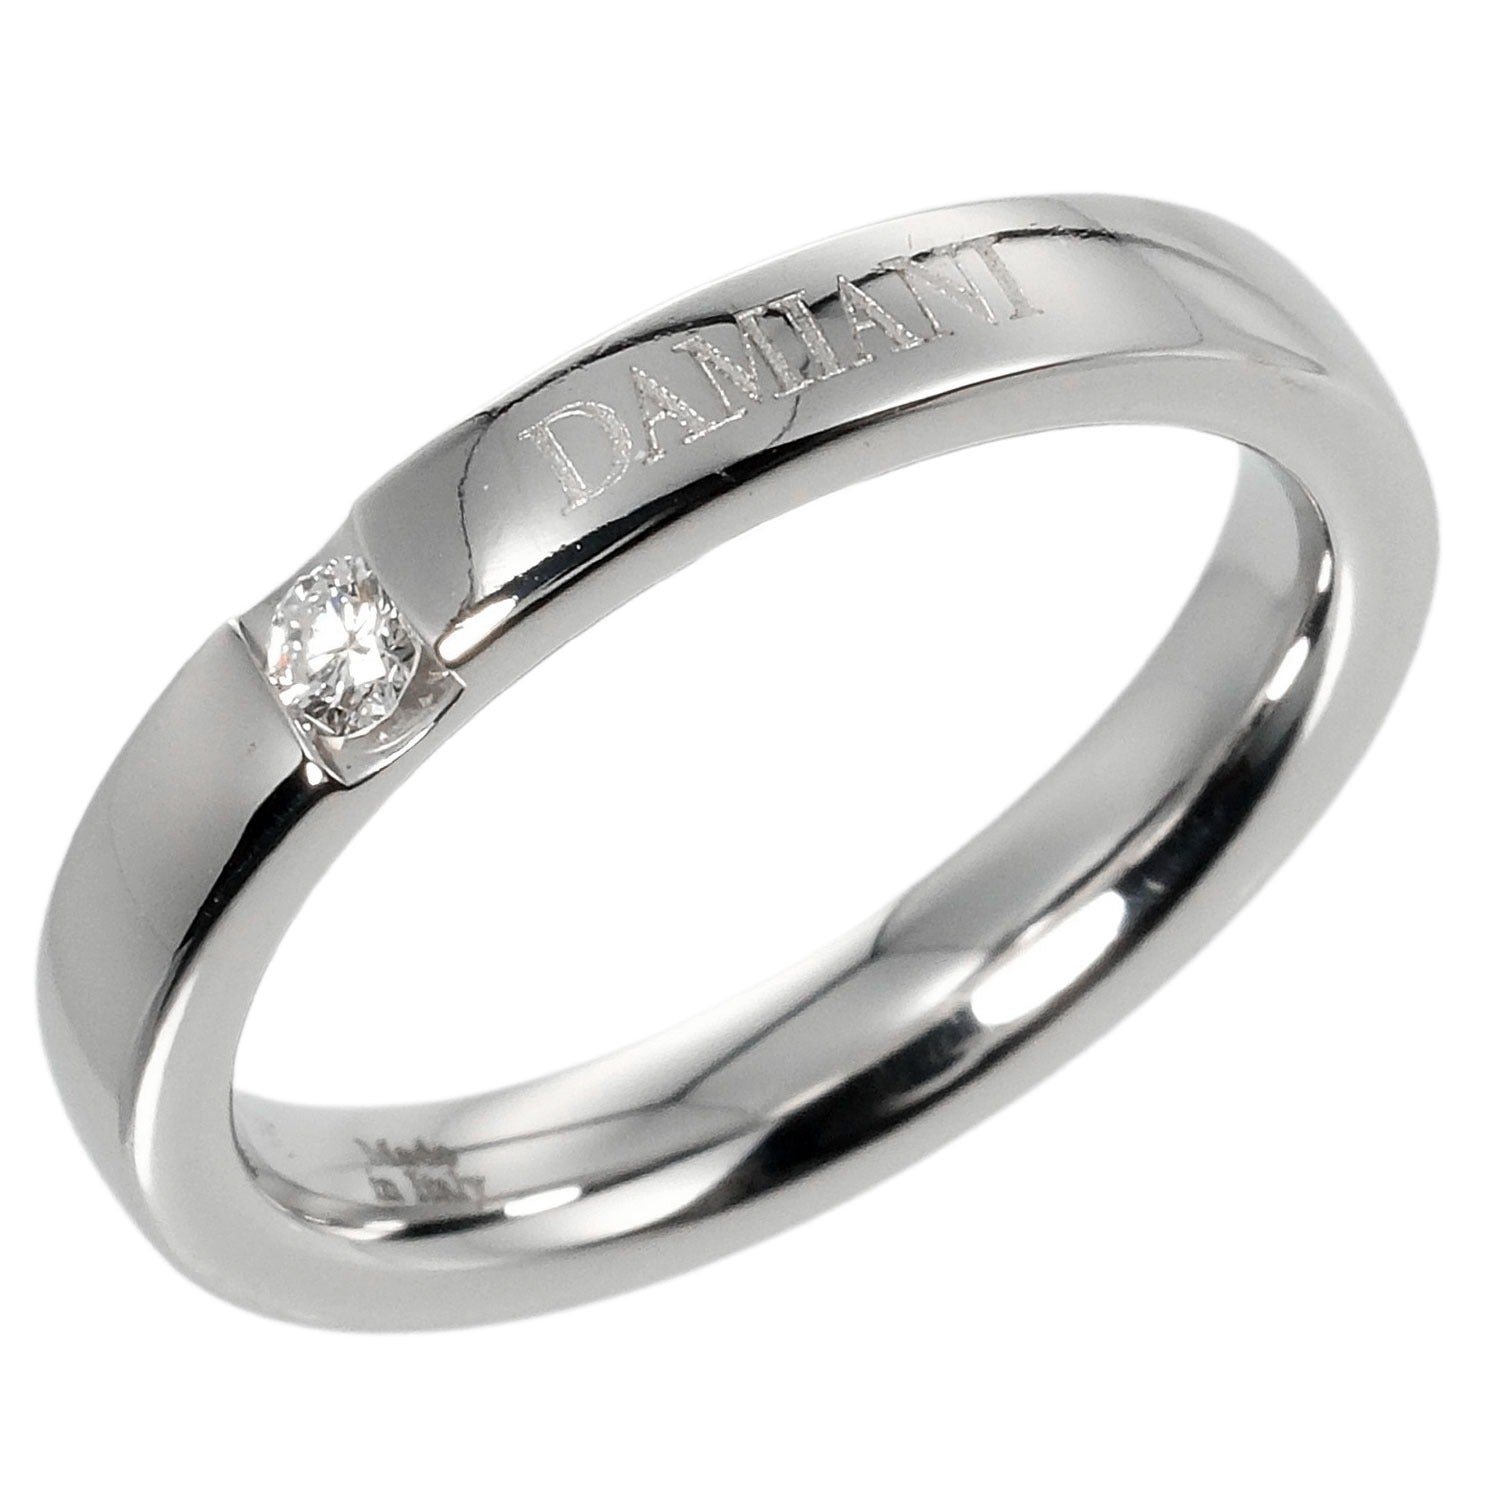 Damiani Vera Amore Size 14 Ring with 6.3g Weight, K18 White Gold & Diamond, Pre-Owned Grade A+